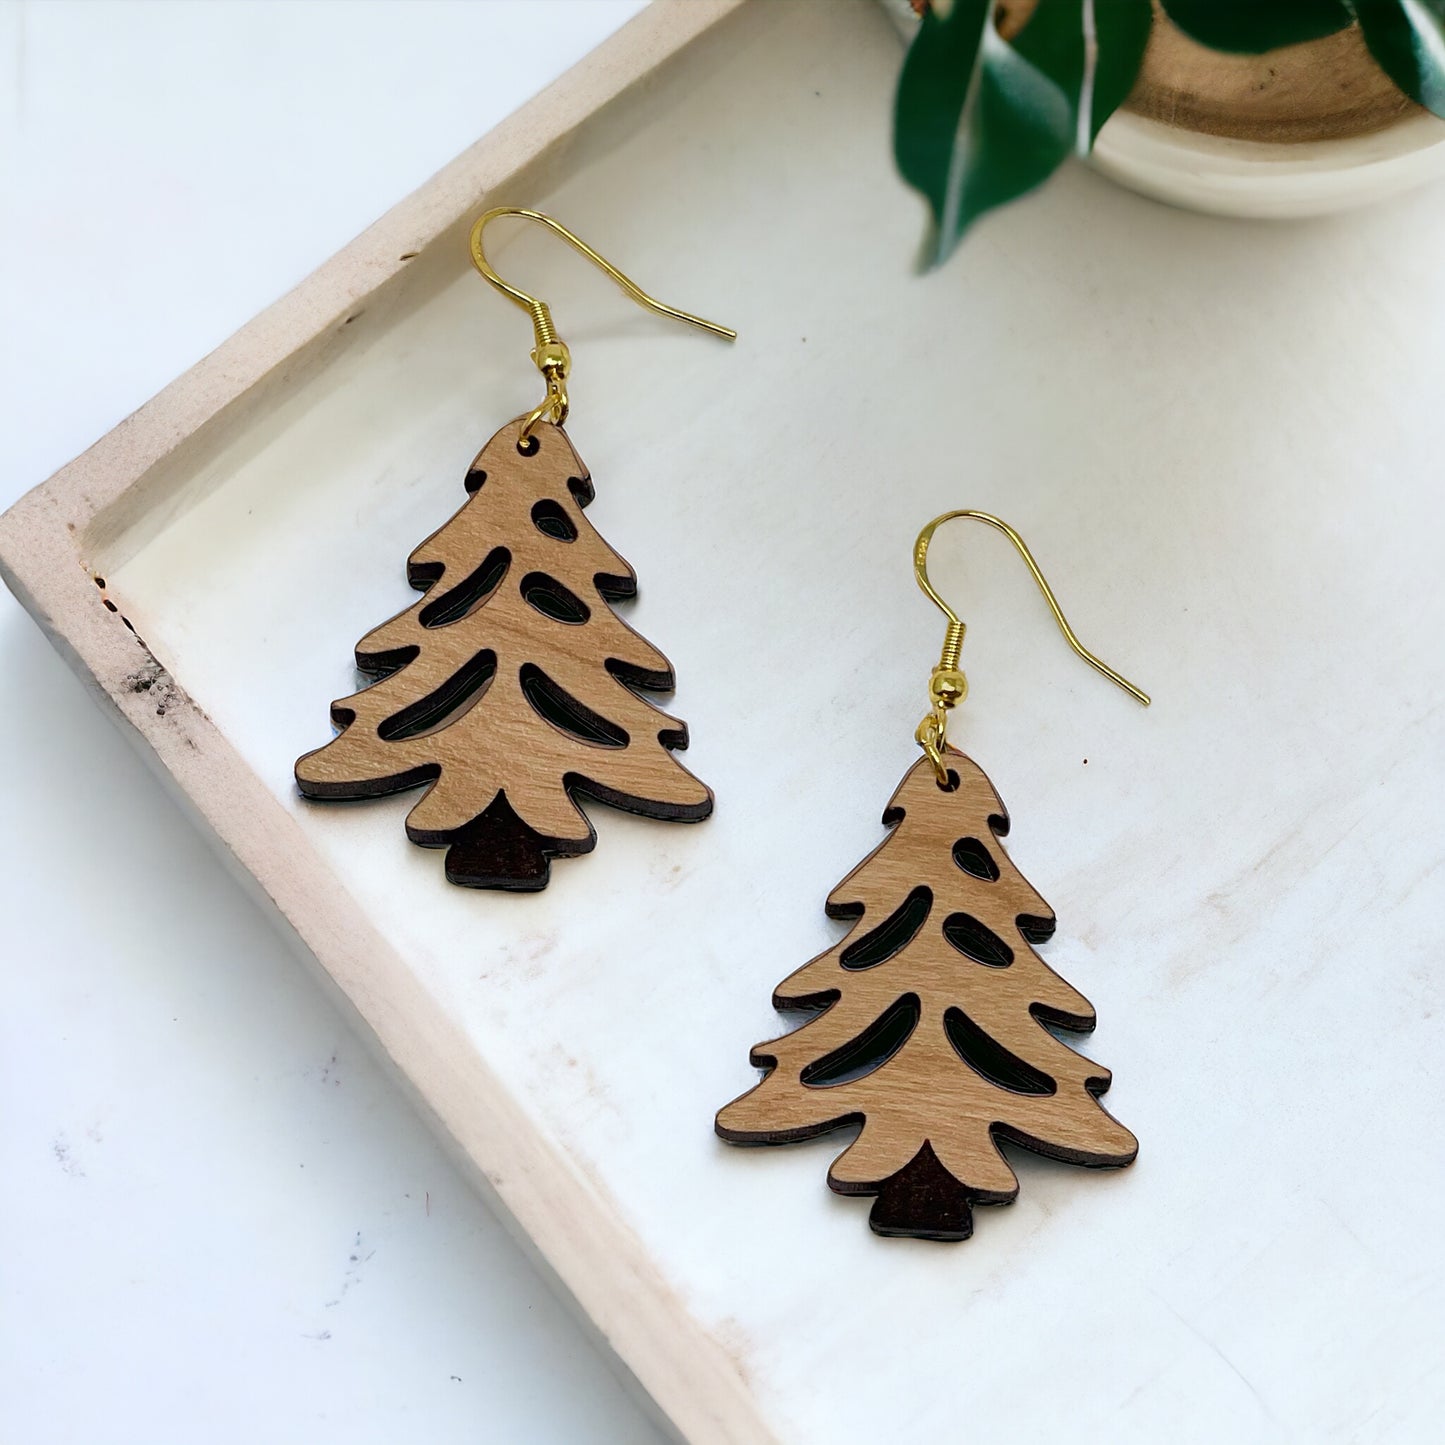 Tree Earrings - Rustic Wood Dangle Earrings with a Whimsical Boho Touch, Cute Winter Holiday Accessories | Nature-Inspired Jewelry